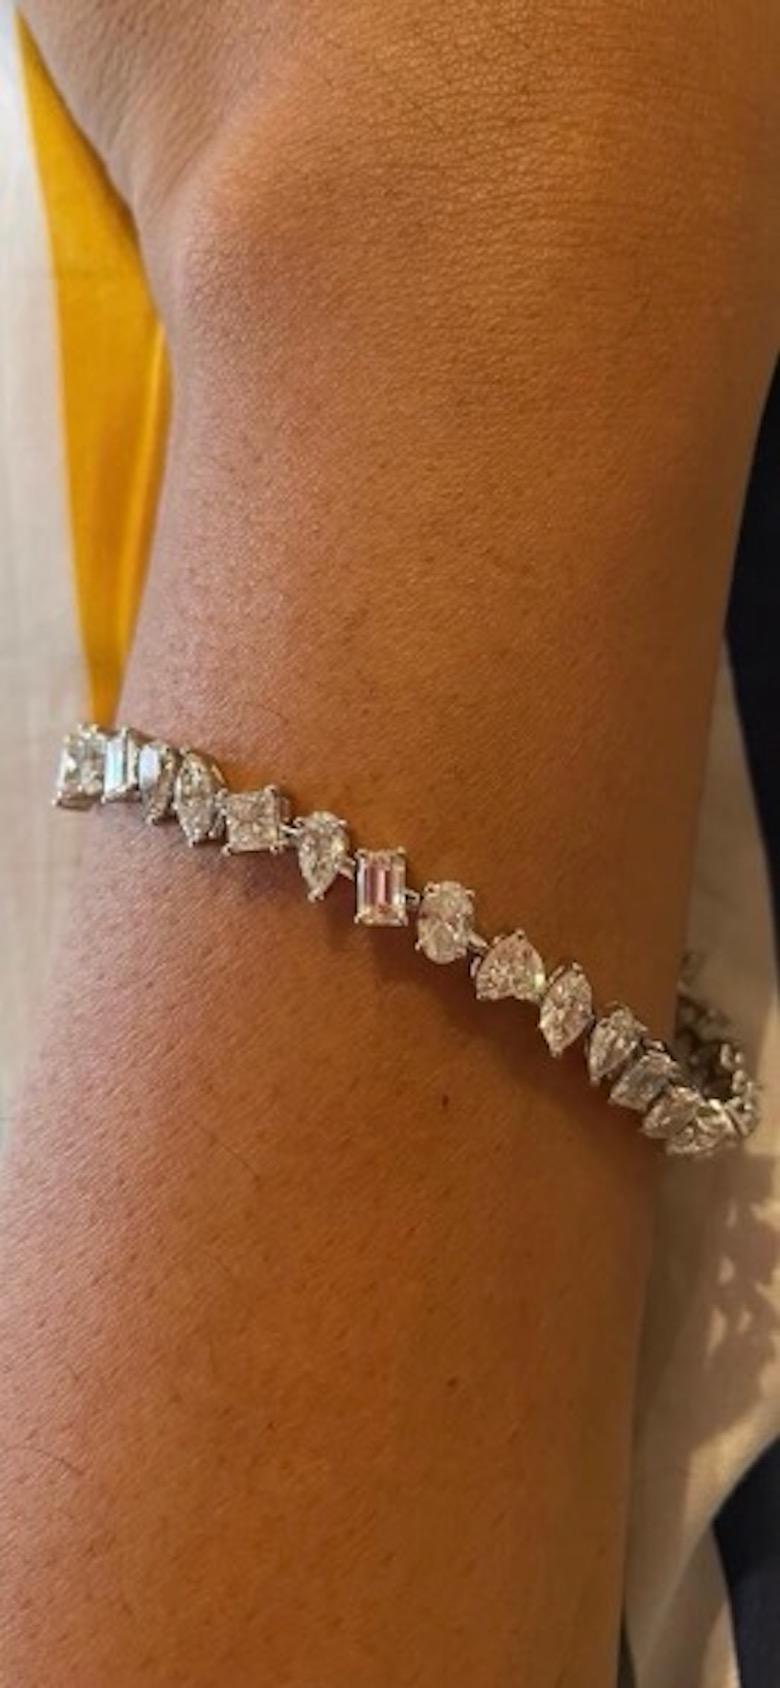 A grand party of popular diamonds.
The Carina diamond bracelet gives you more with every diamond in its symmetry. The diagonal placement of the diamonds ensures you get to flaunt maximum diamonds at a breathtaking price. Featuring a marvelous set of